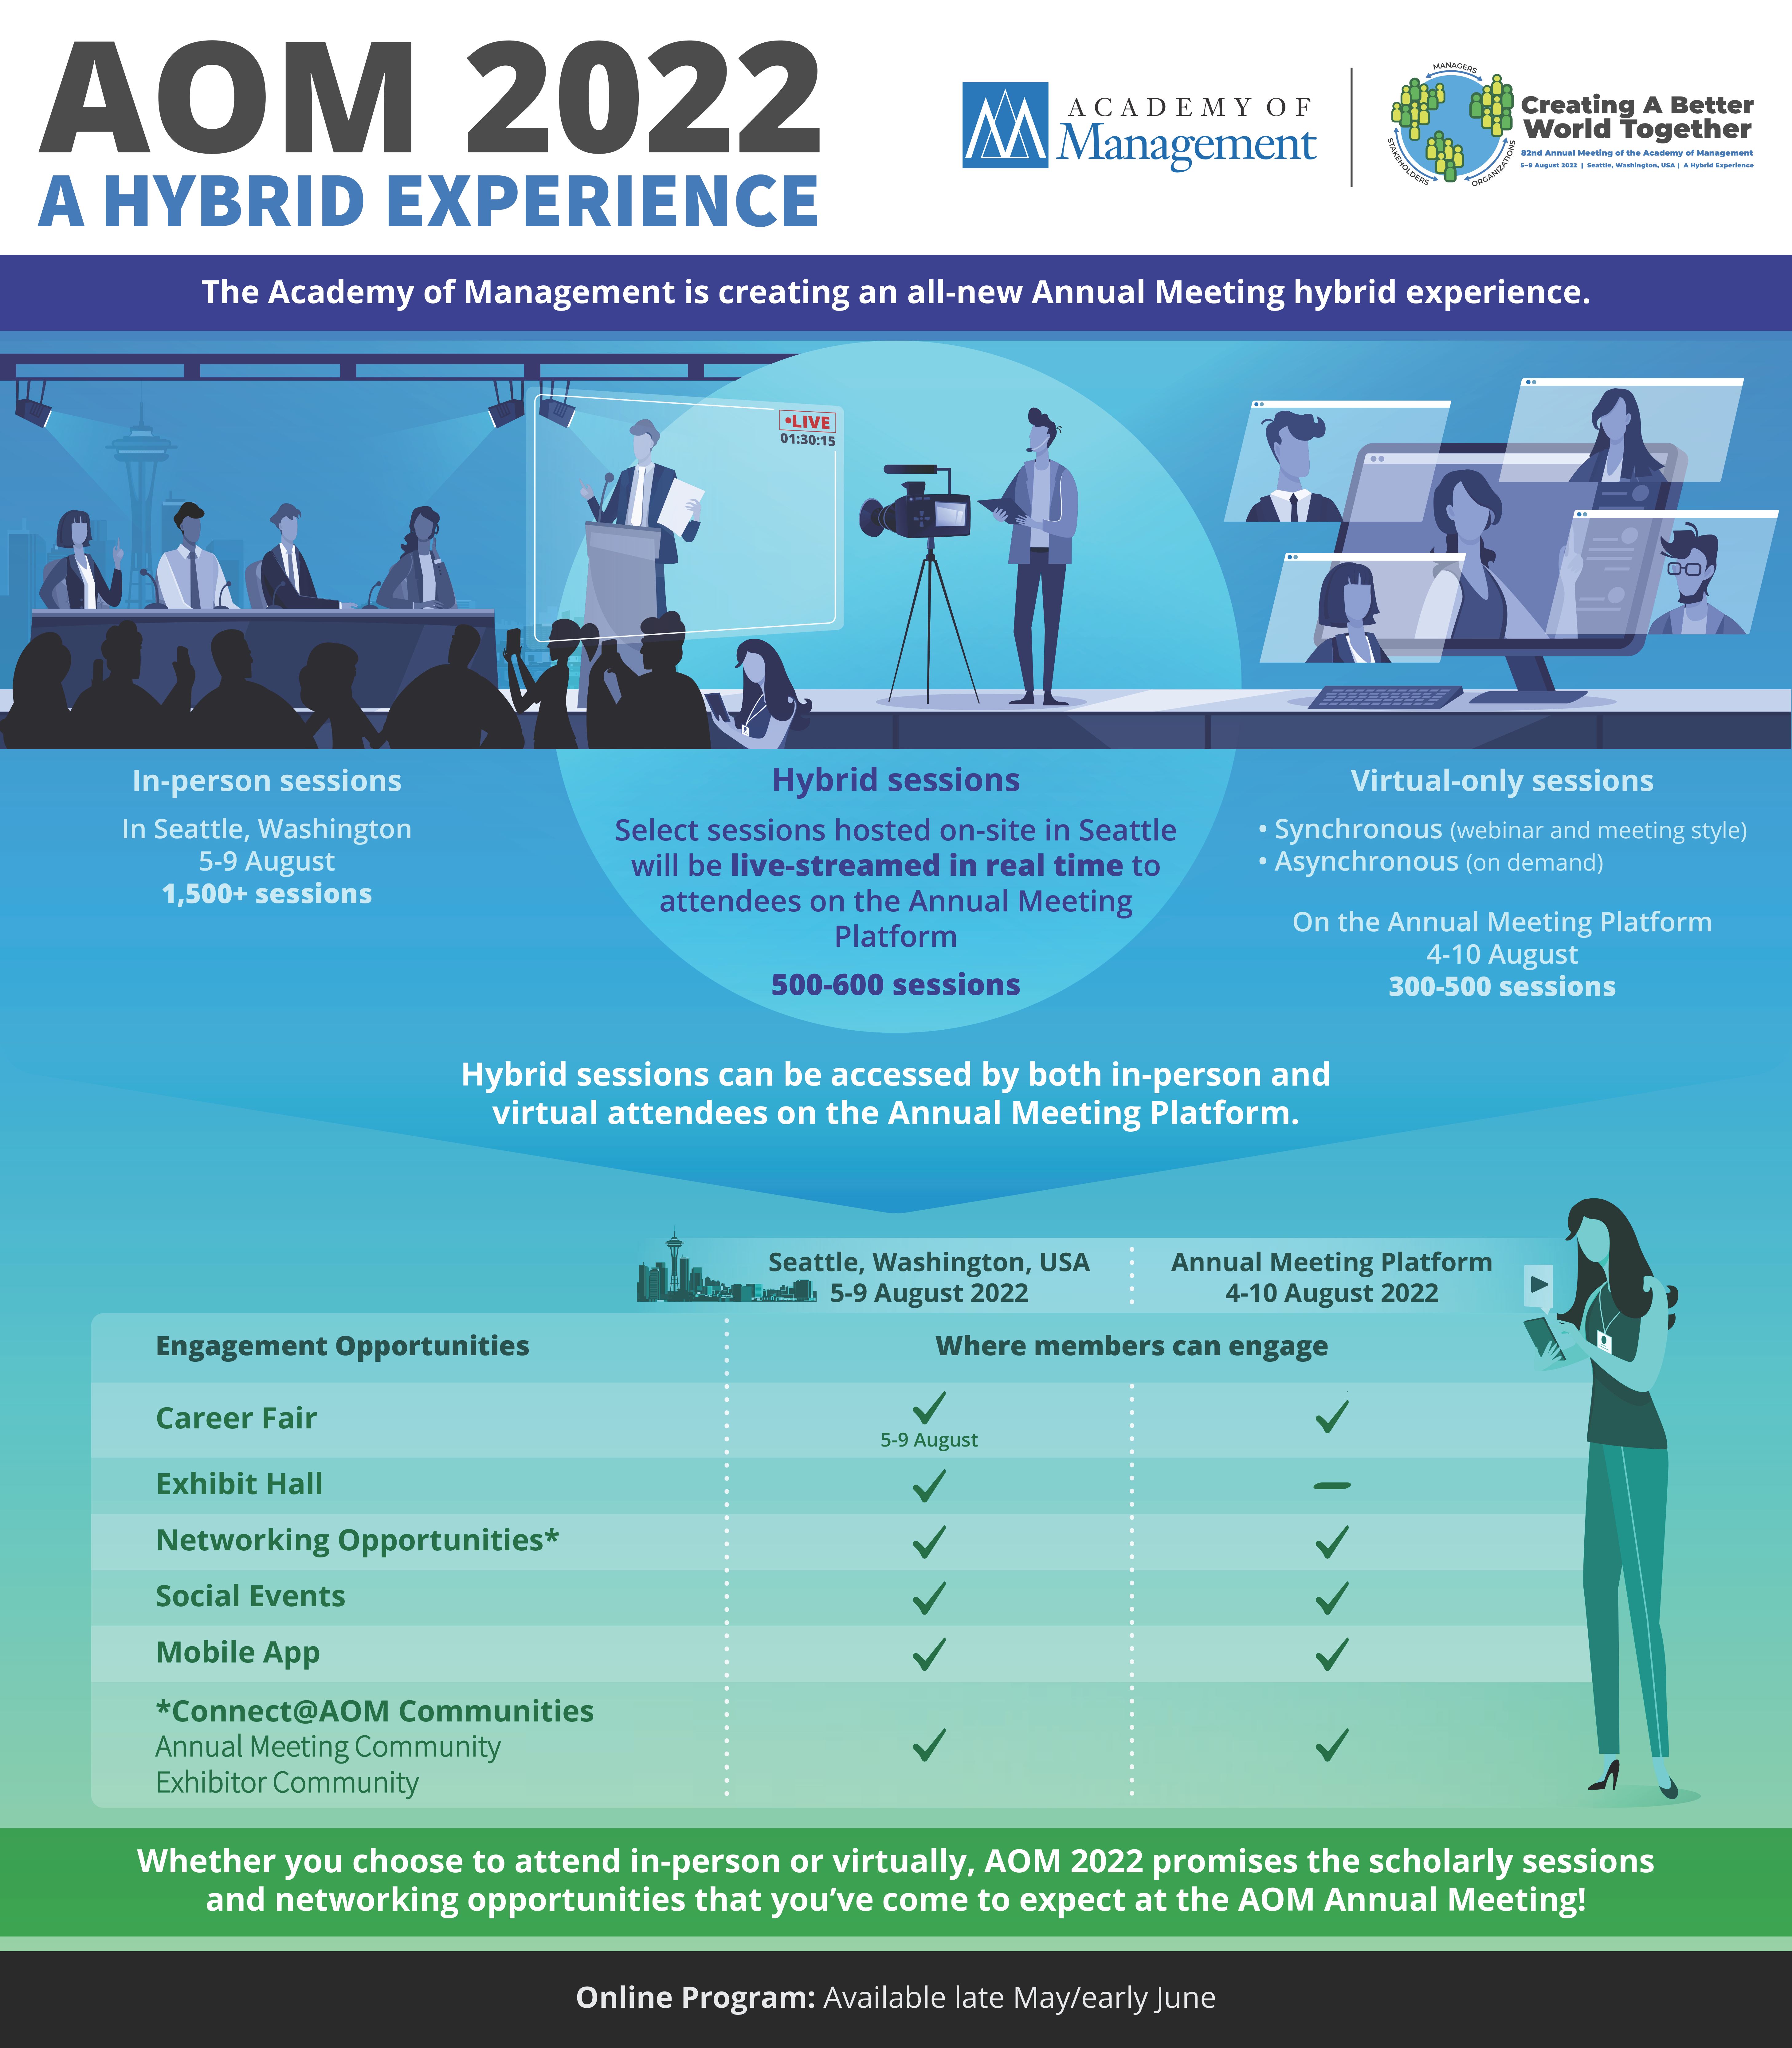 AOMRS_98_5_An_Introduction_to_the_Annual_Meeting_Hybrid_Experience_Infographic_Mar_1_2022